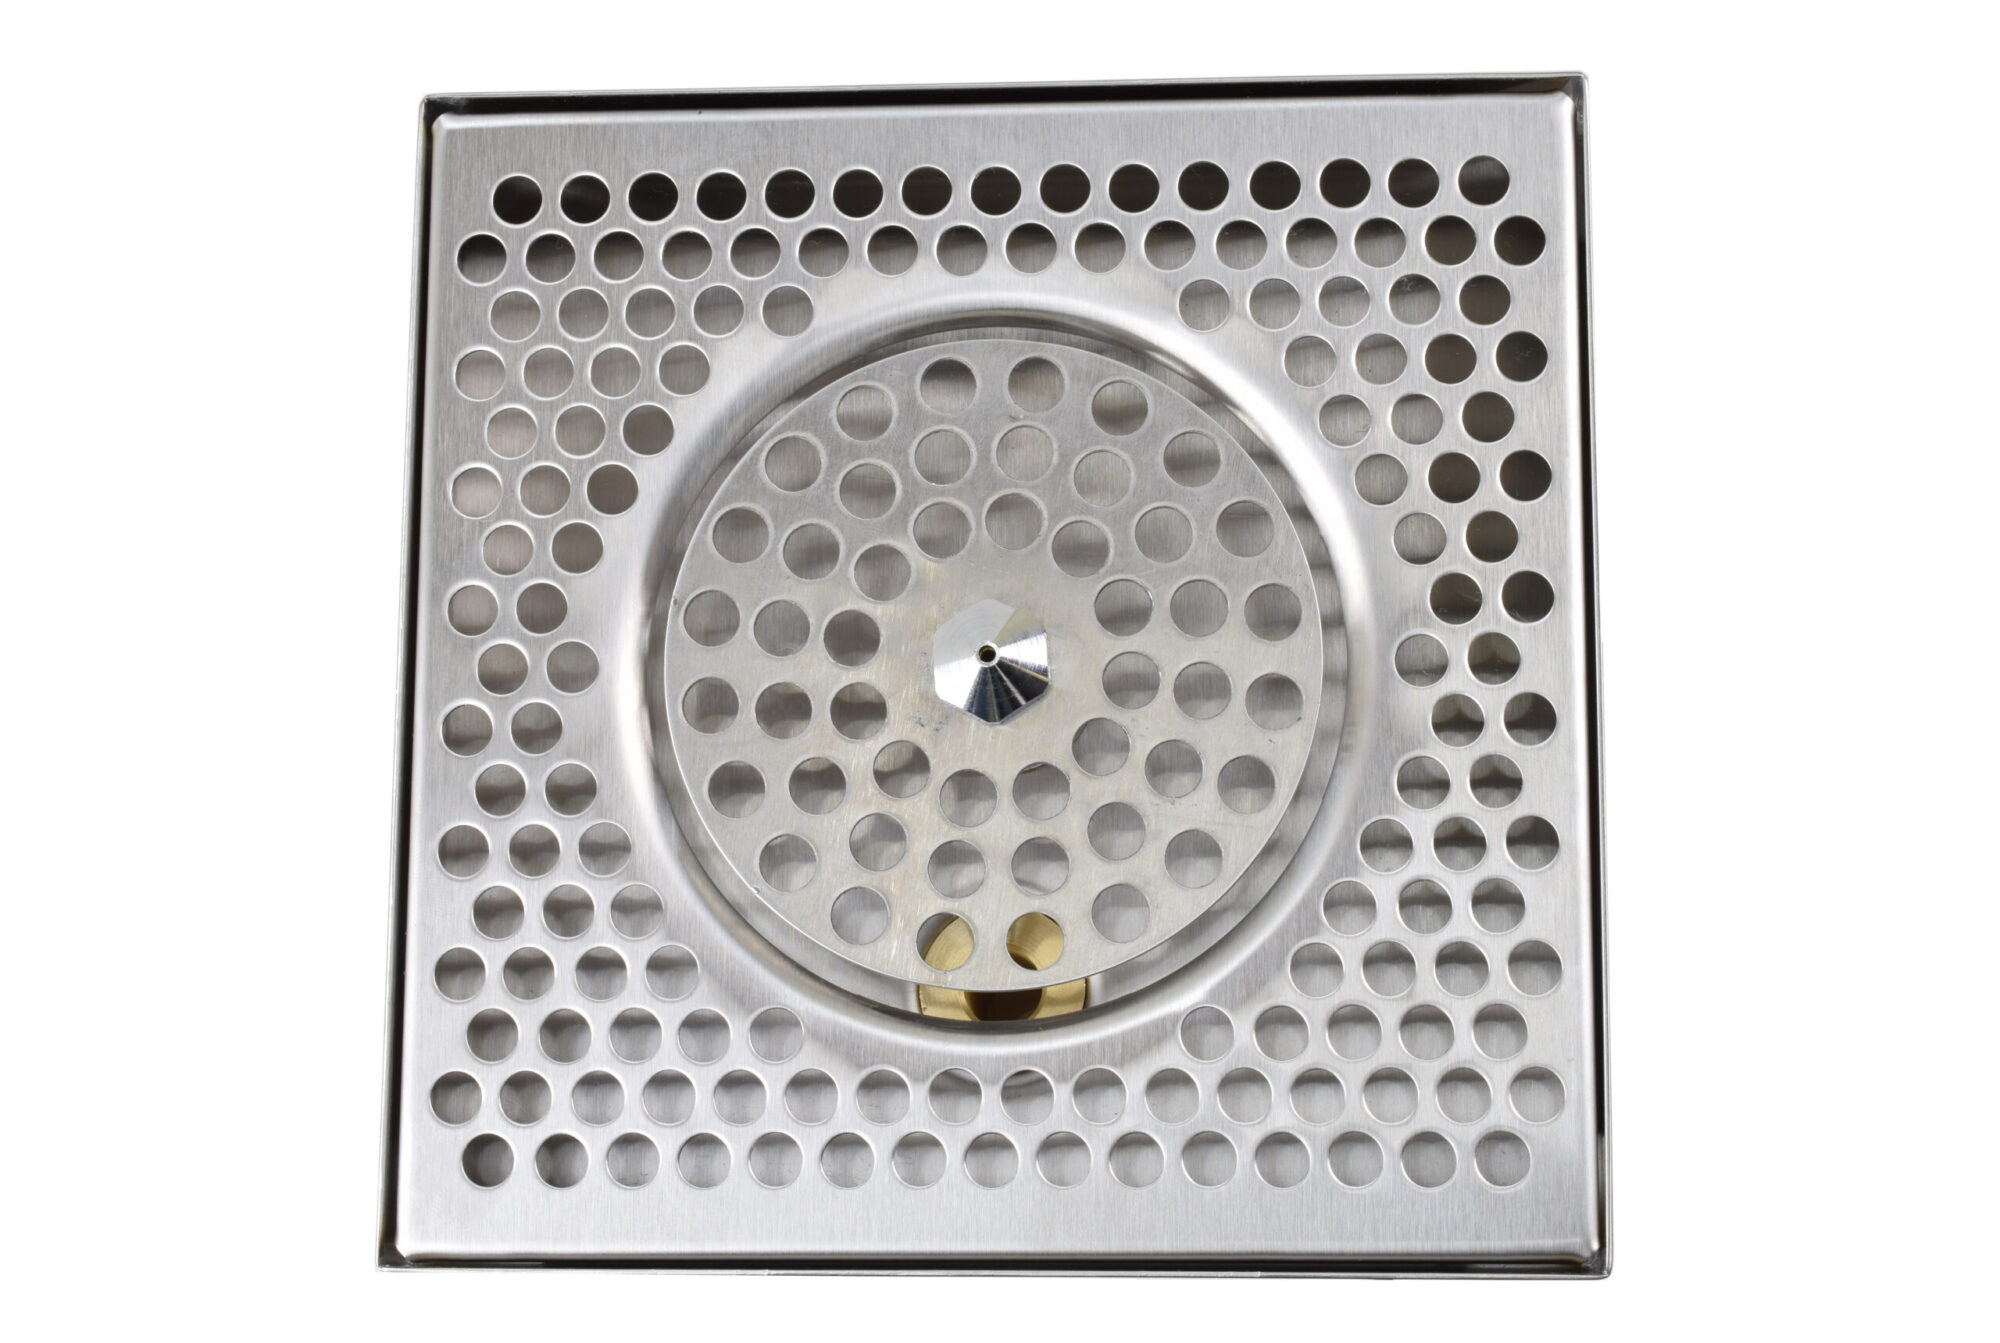 617R-8 Stainless Steel Rinser Tray and Perforated Grid Includes 1/2" Barb Water Inlet and 2" x 1/2"NPT Drain - 8"L x 8"W x 7/8"D